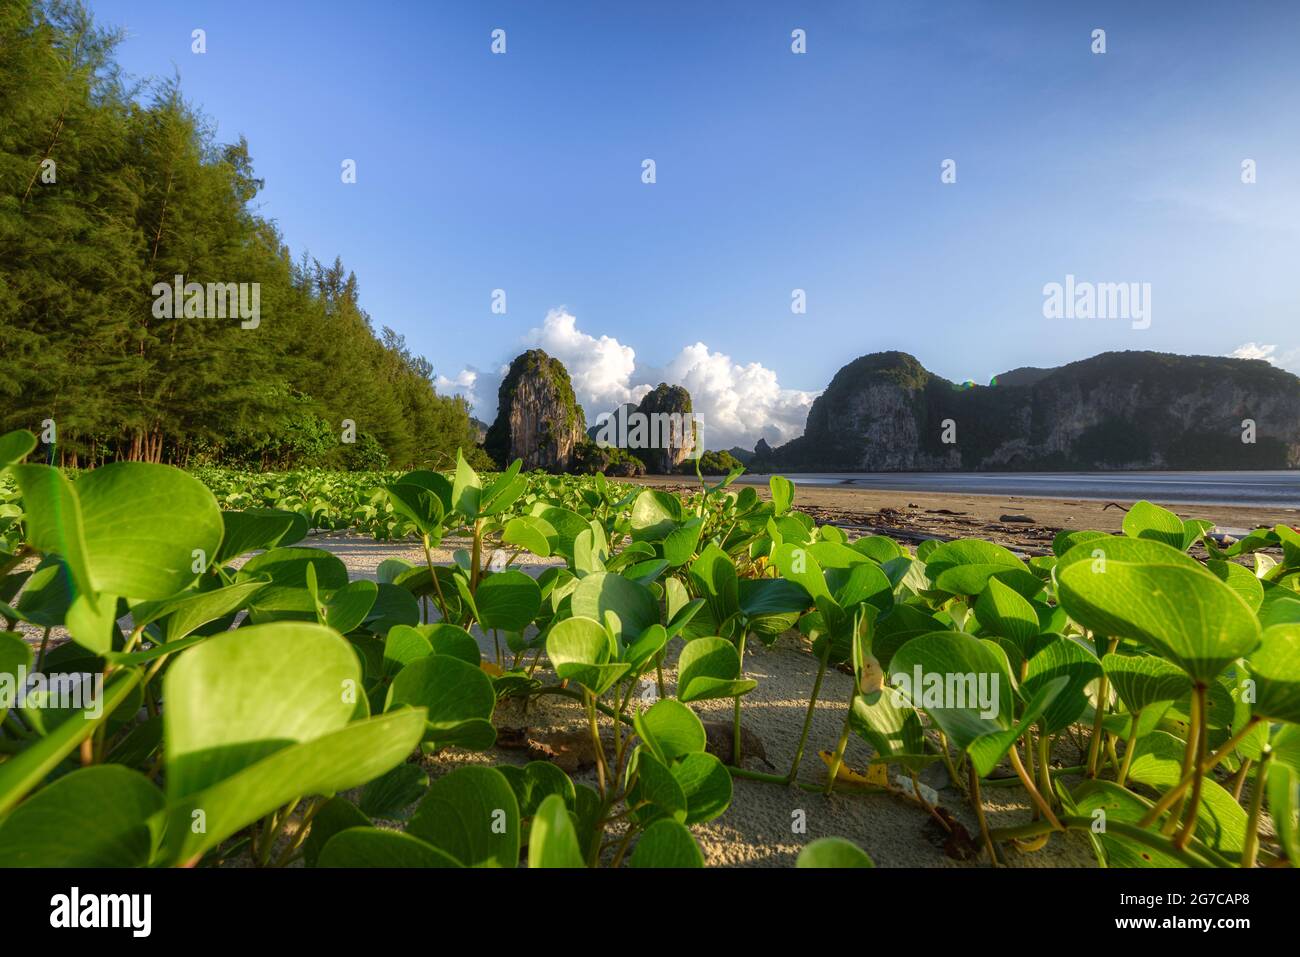 The scenery of Goat's foot creeper, Beach morning glory Ipomoea pes-caprae ,bayhops with a limestone mountain background at Trang province, Thailand. Stock Photo